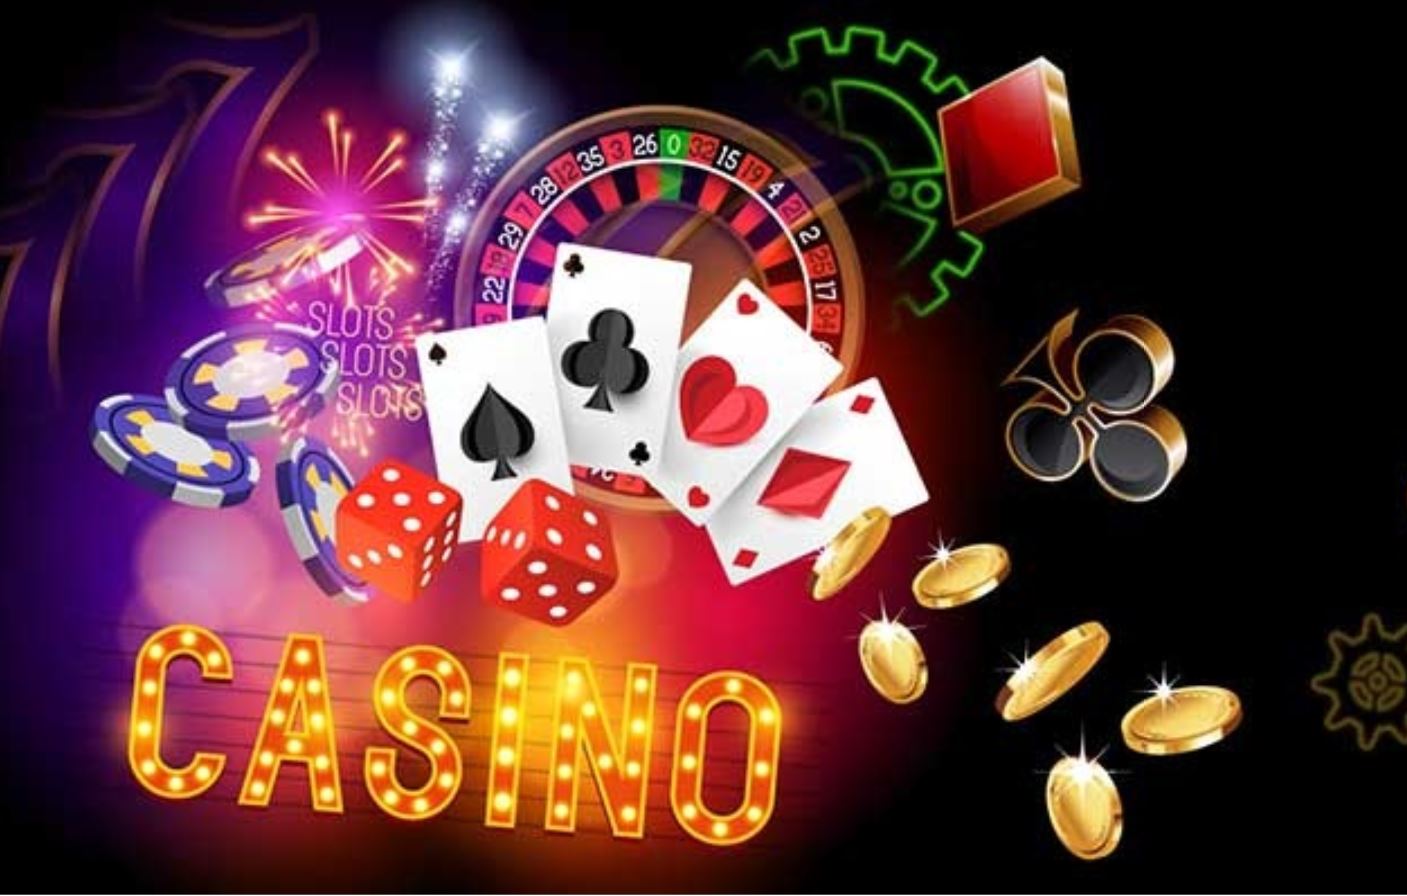 9Club Casino Best Slots & Games - Welcome Offer - 2021